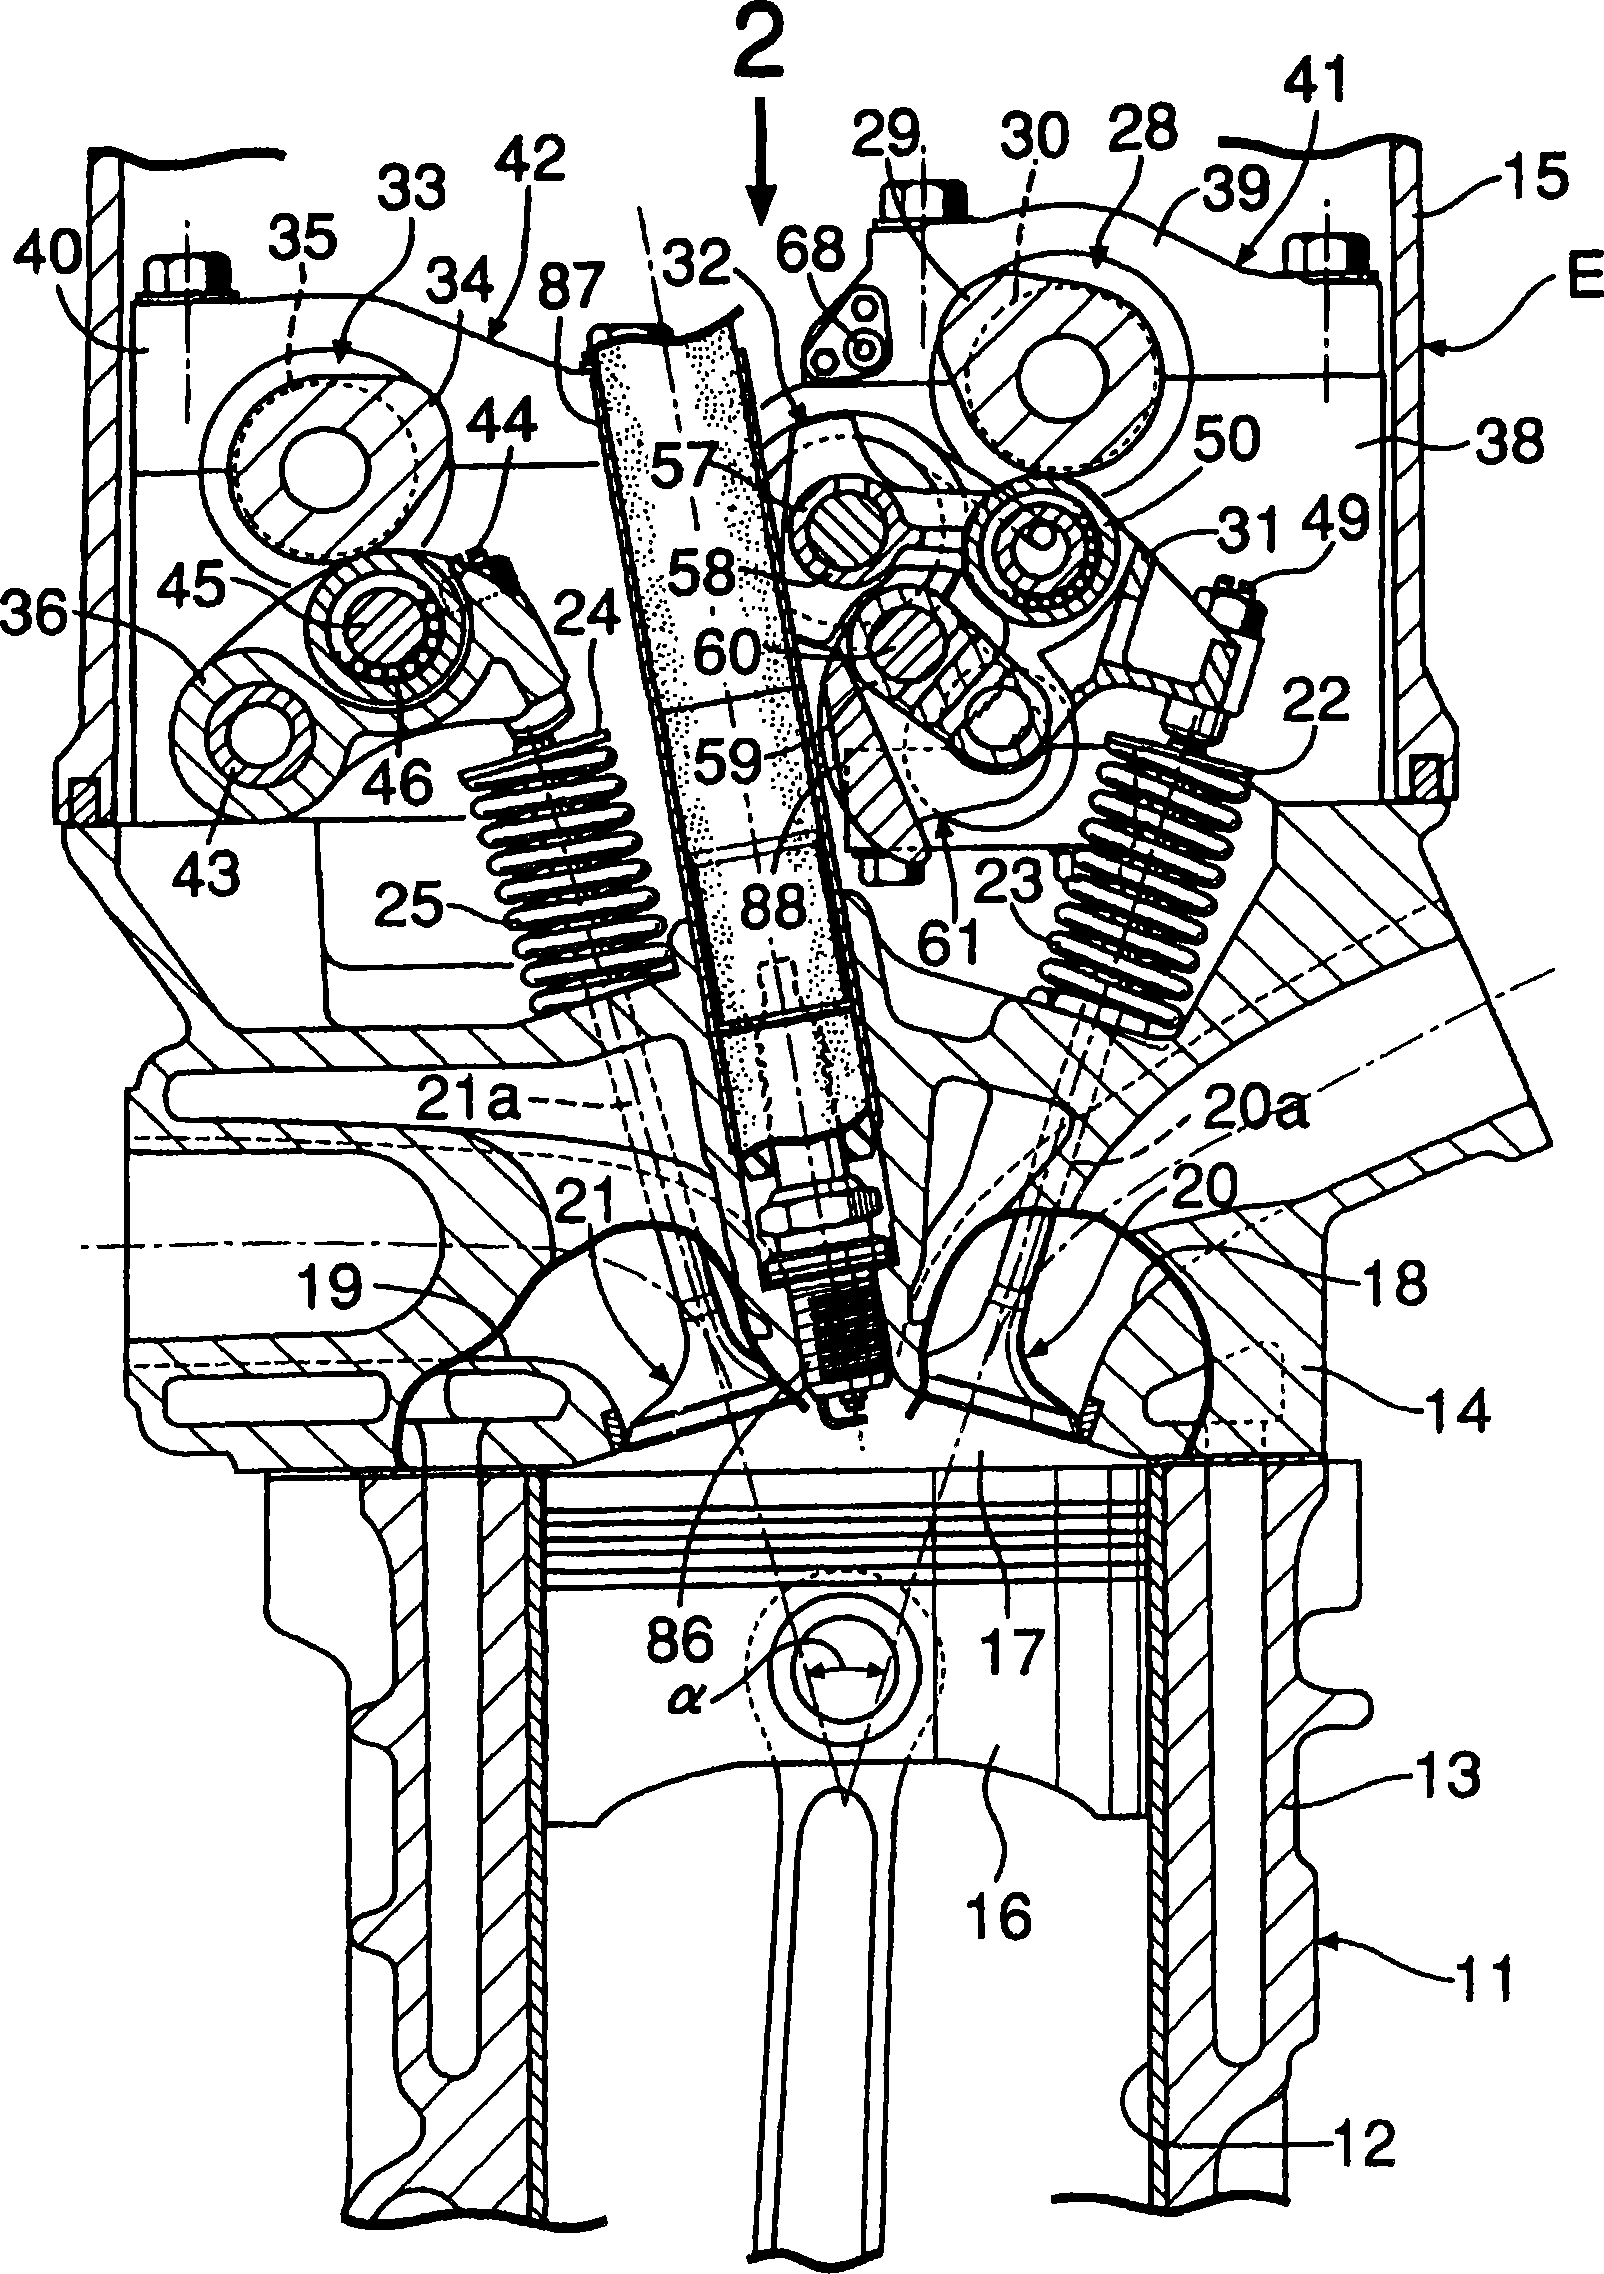 Variable valve lift device of internal combustion engine